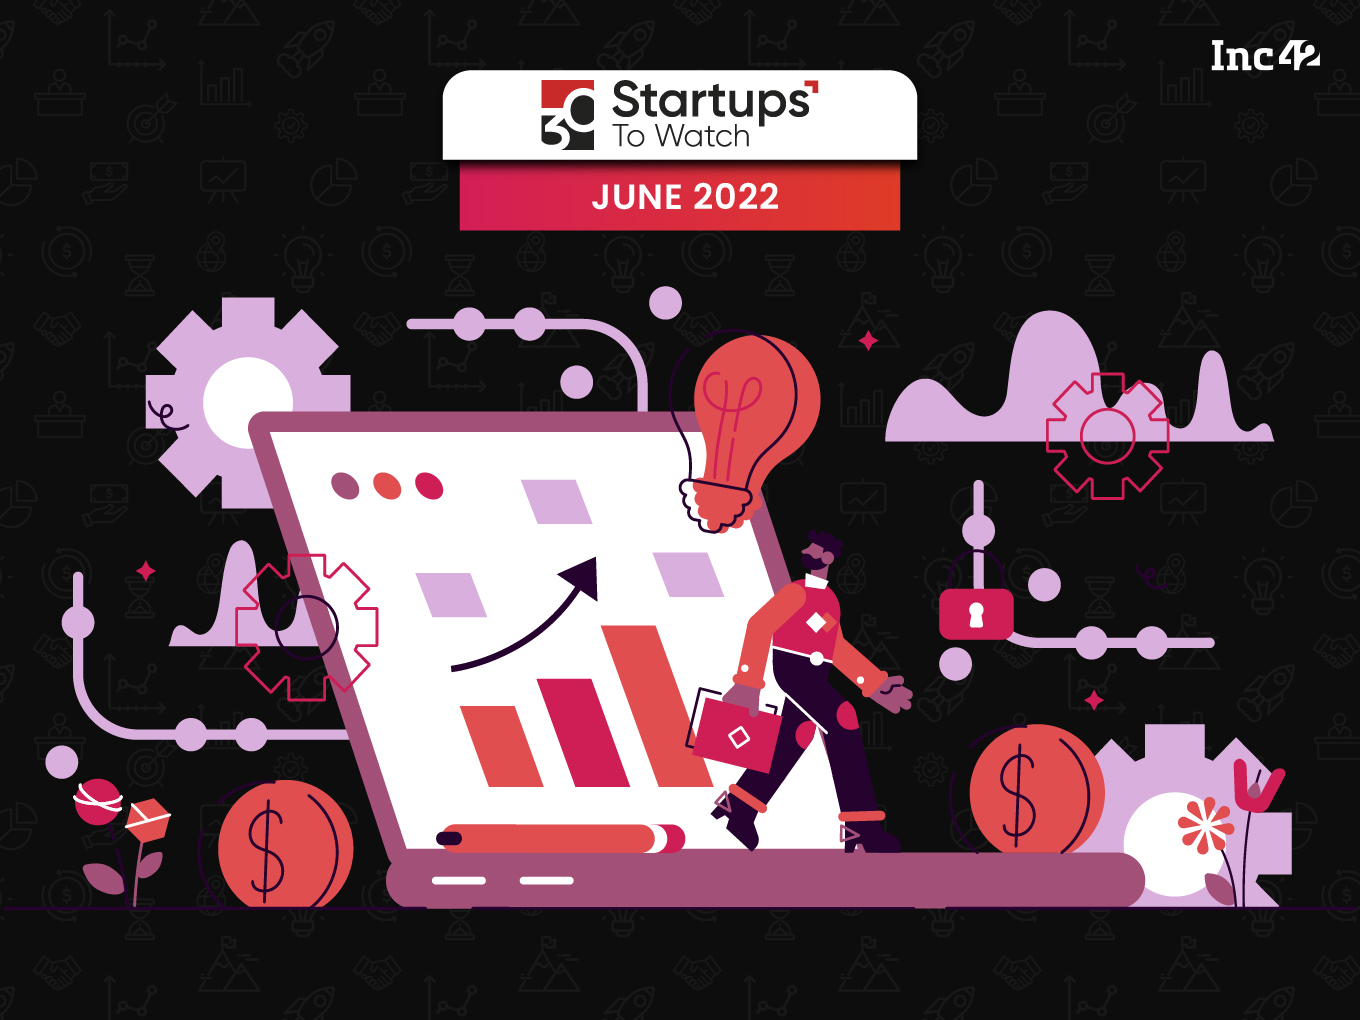 30 Startups To Watch: Startups That Caught Our Eye In June 2022 - Fintech Edition